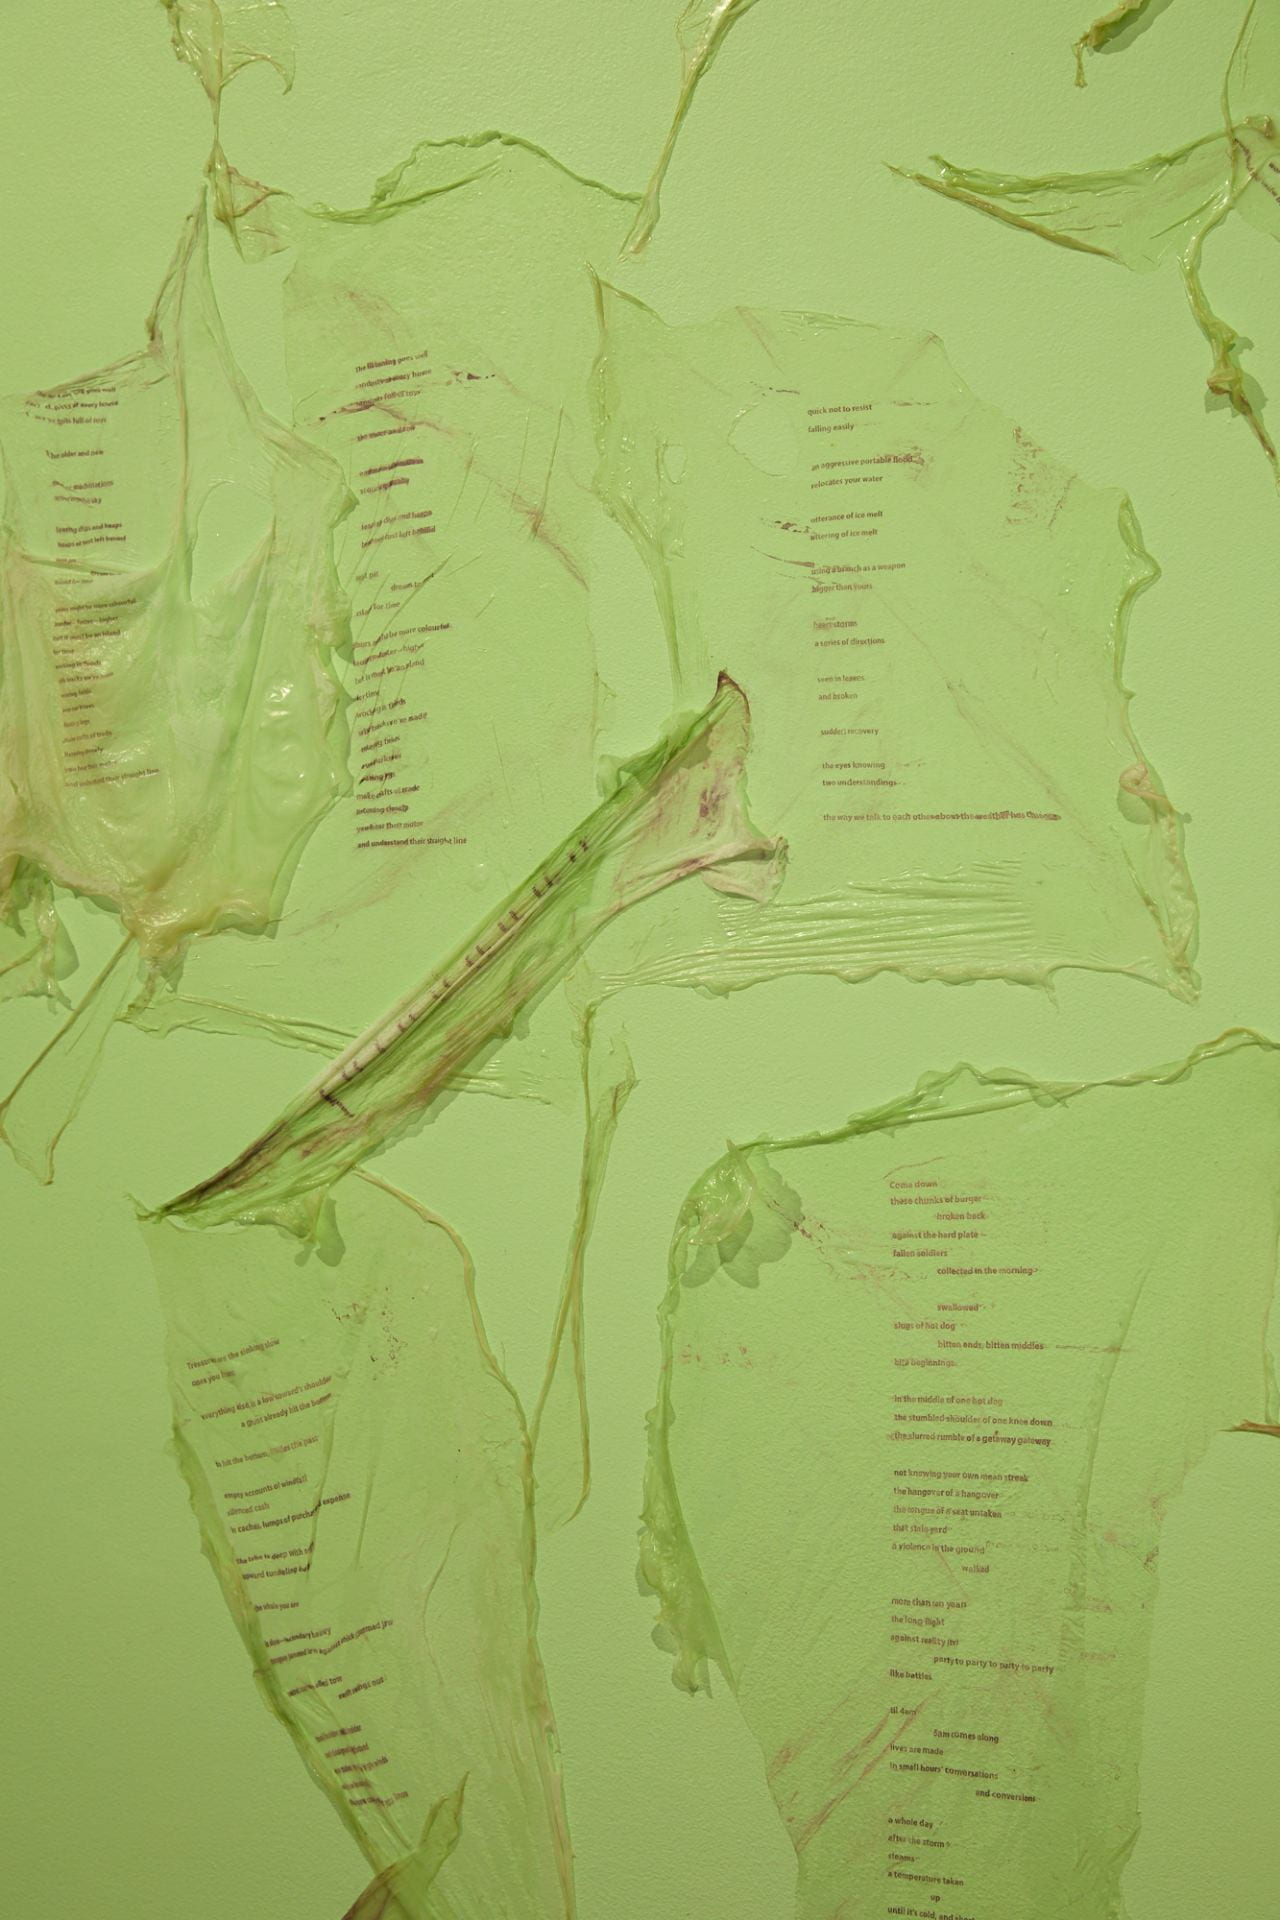 Pieces of very thin translucent cellulose are pasted to a green wall. The cellulose has text printed on it.